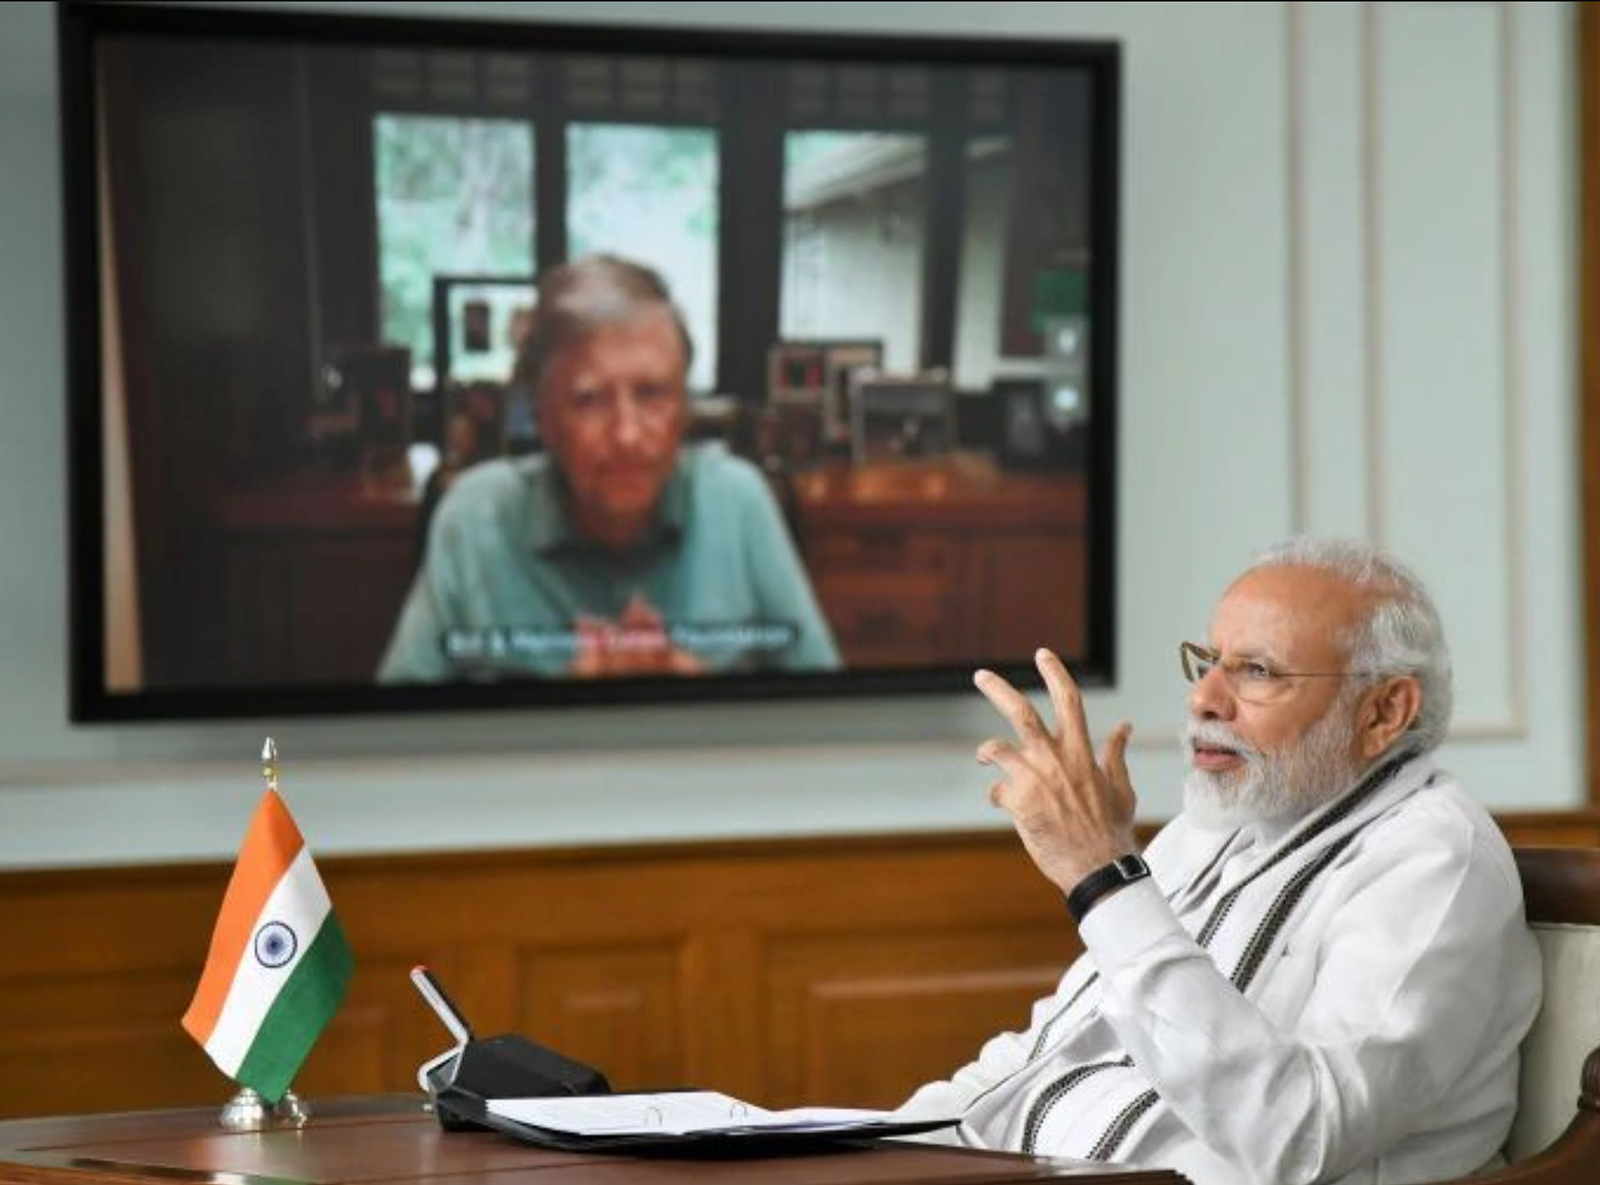 Indian Prime Minister Narendra Modi holds a video conference with Bill Gates.